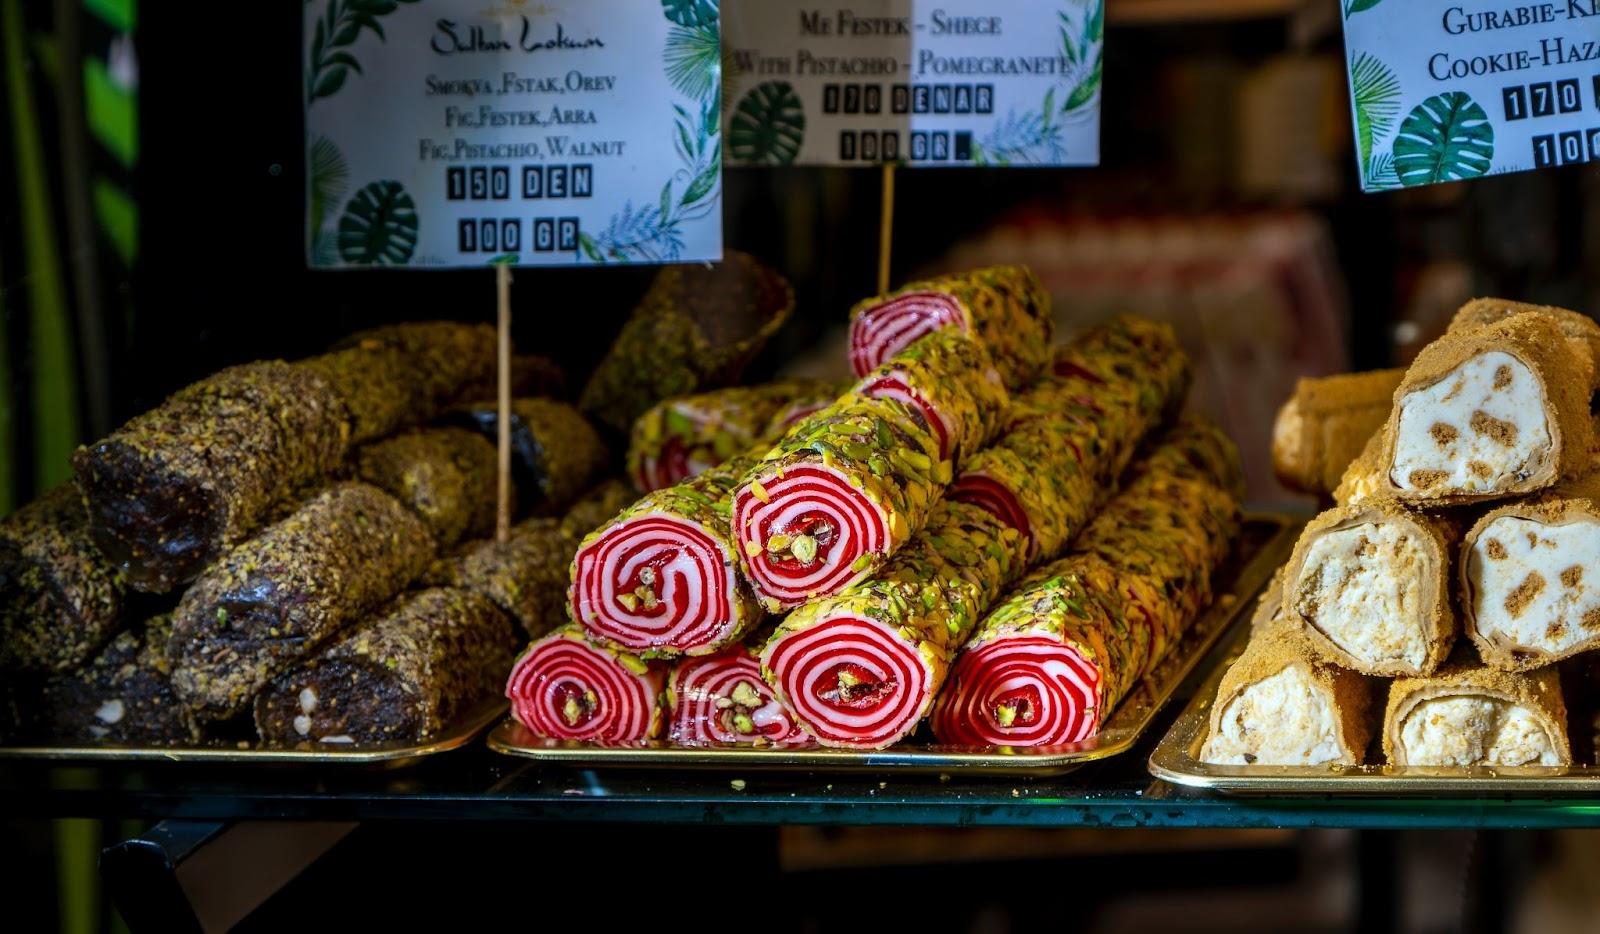 Colourful sweets in the window of the old bazaar sweets shop. North Macedonia